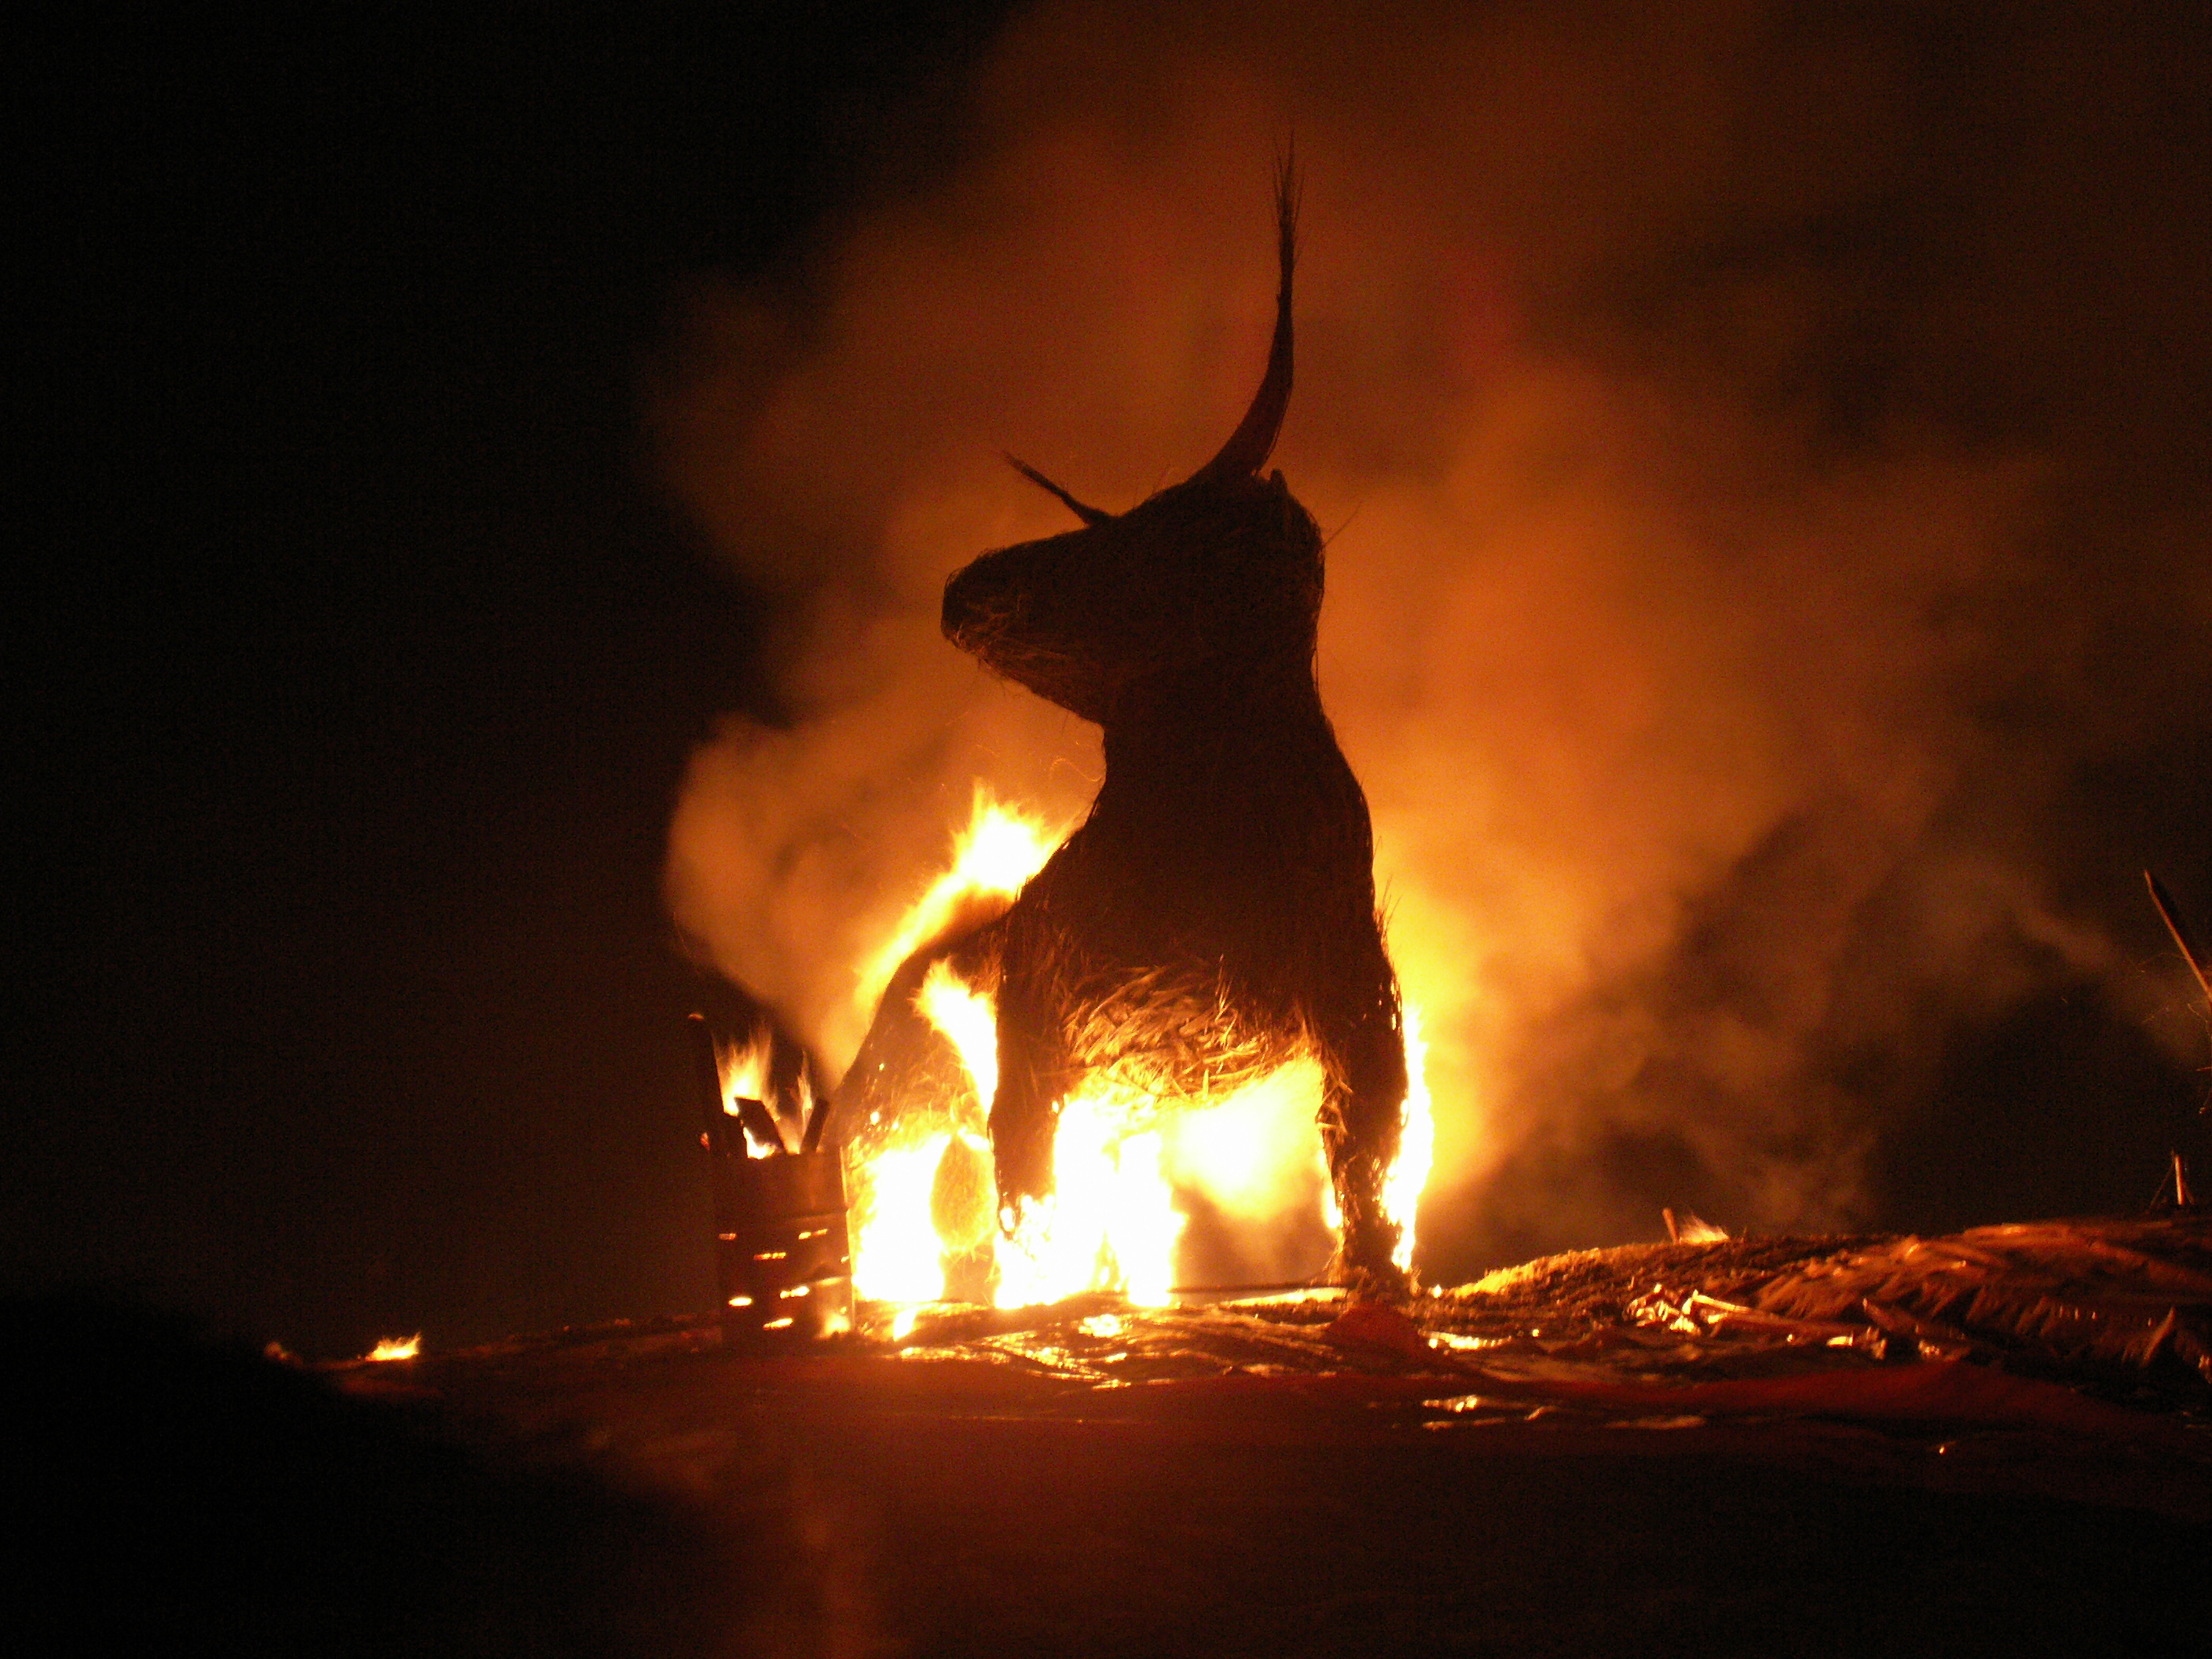 The Brazen Bull - When a victim is placed inside the brazen bull, he or she is slowly burned to death. This device gradually became more sophisticated until the Greeks invented a complex system of tubes in order to make the victim's screams sound like an infuriated ox.